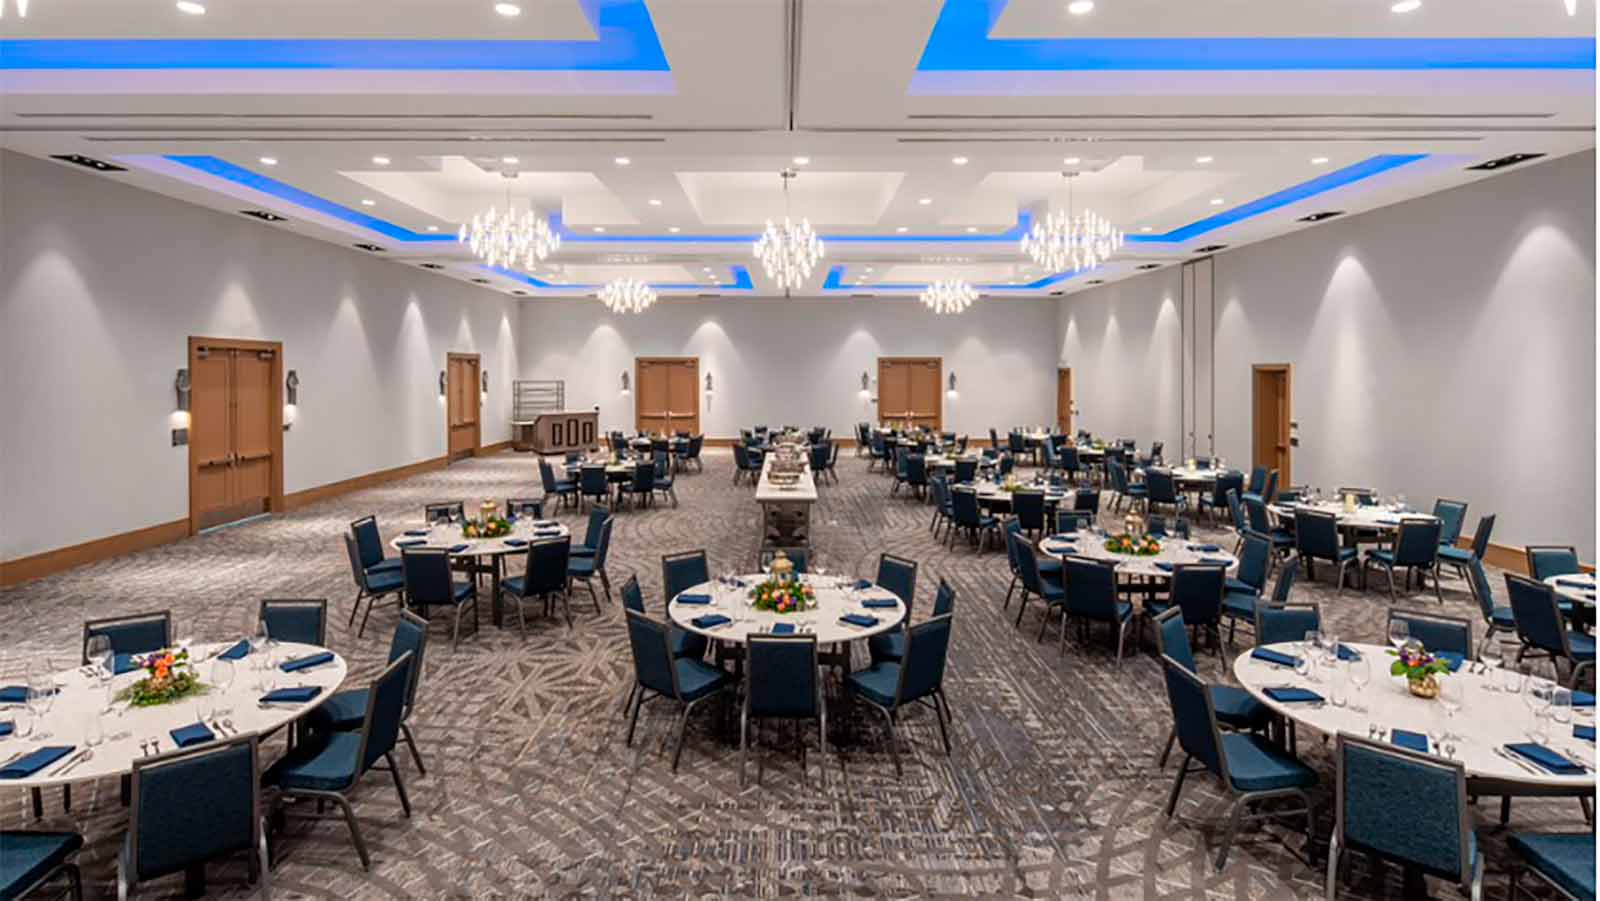 The conference hall at The Celeste Hotel Orlando